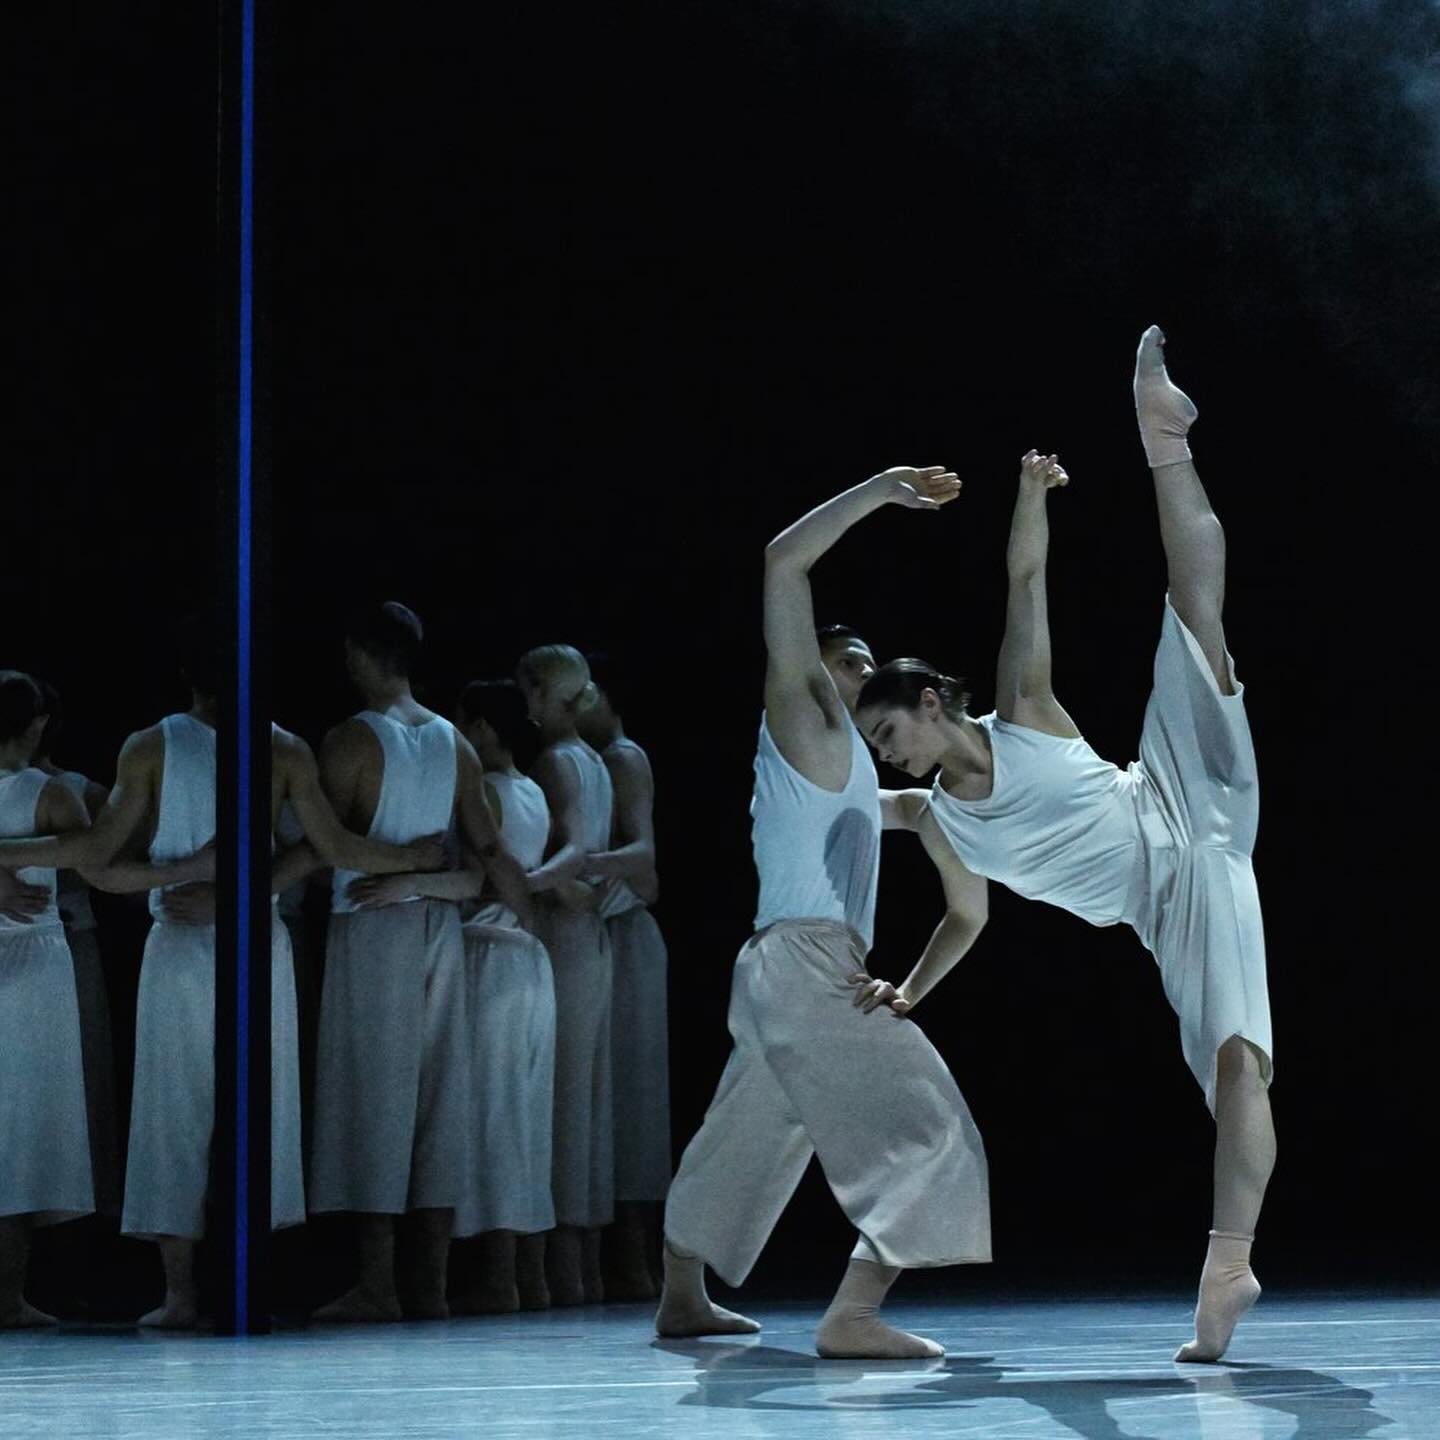 Flowing beauty, atmospheric visuals as FOR EVER devotes an evening to Ballet BC artistic director&rsquo;s work. 

Sophisticated choreography, with nods to classical roots, characterize Medhi Walerski&rsquo;s Chamber, SWAY, and the new Pieces of Tomor